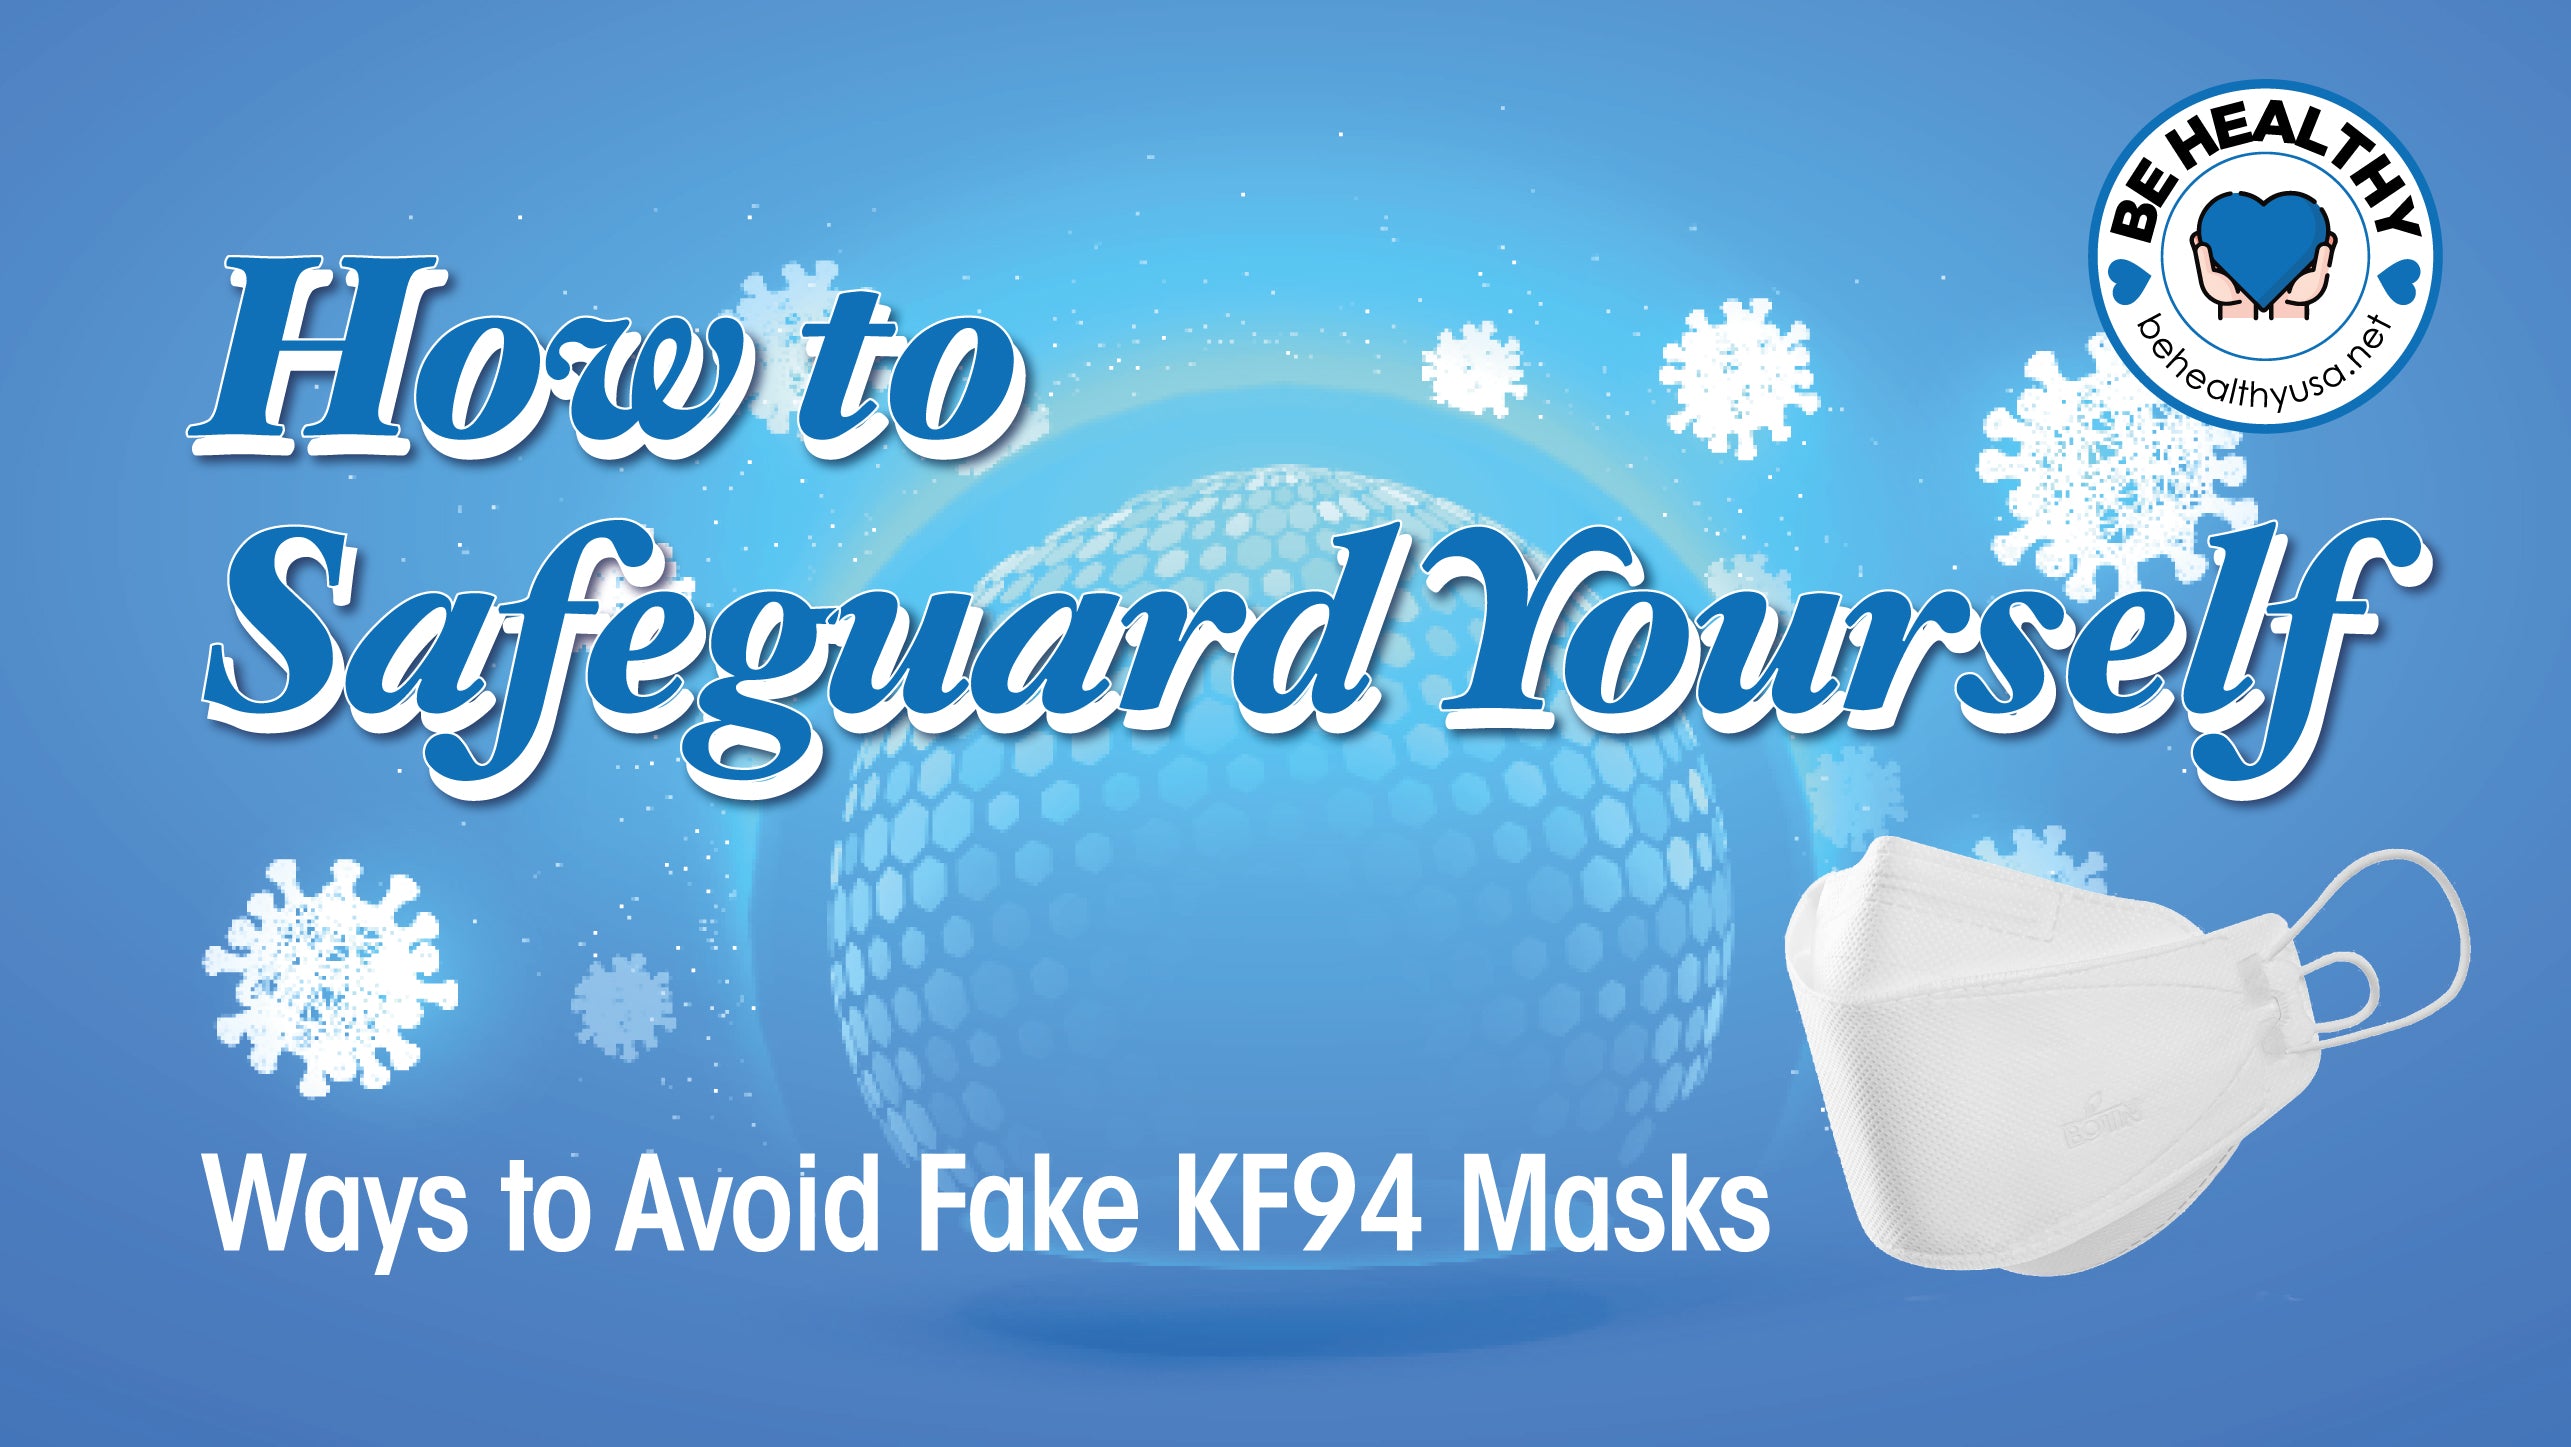 How to Safeguard Yourself: Ways to Avoid Fake KF94 Masks